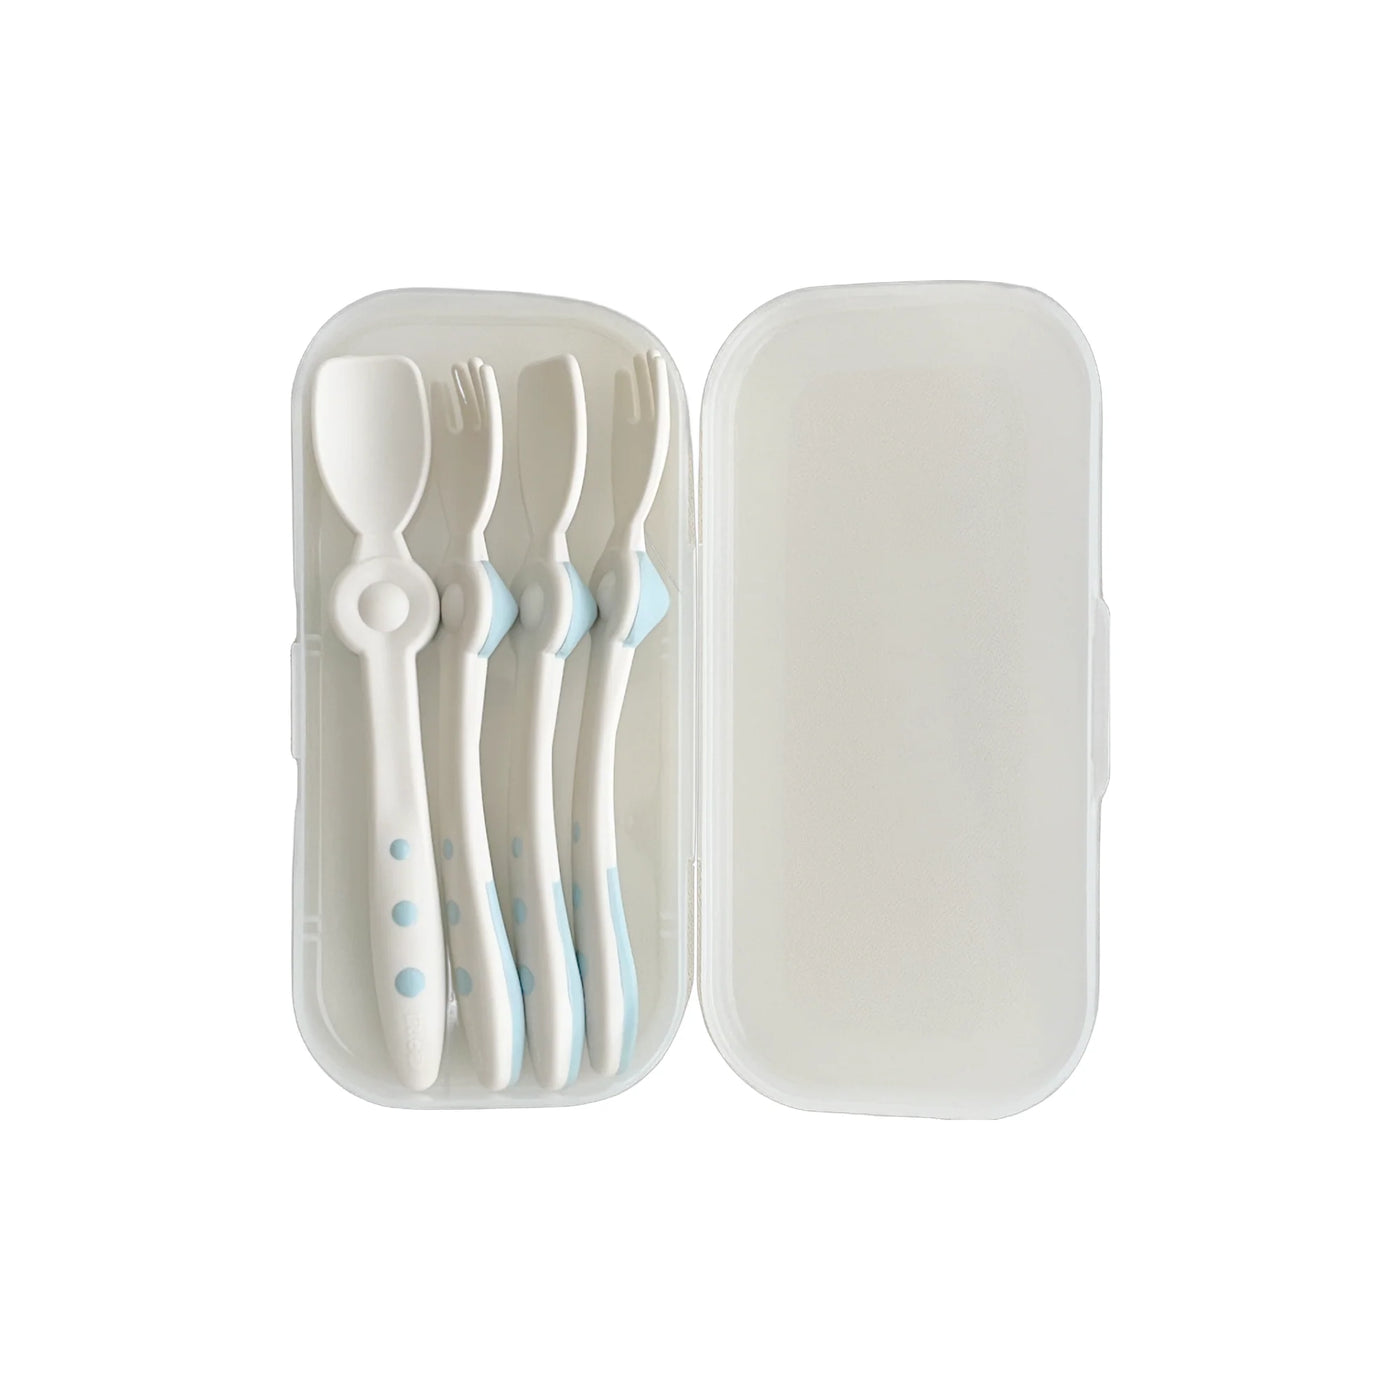 Littoes Travel Cutlery Set for Kids